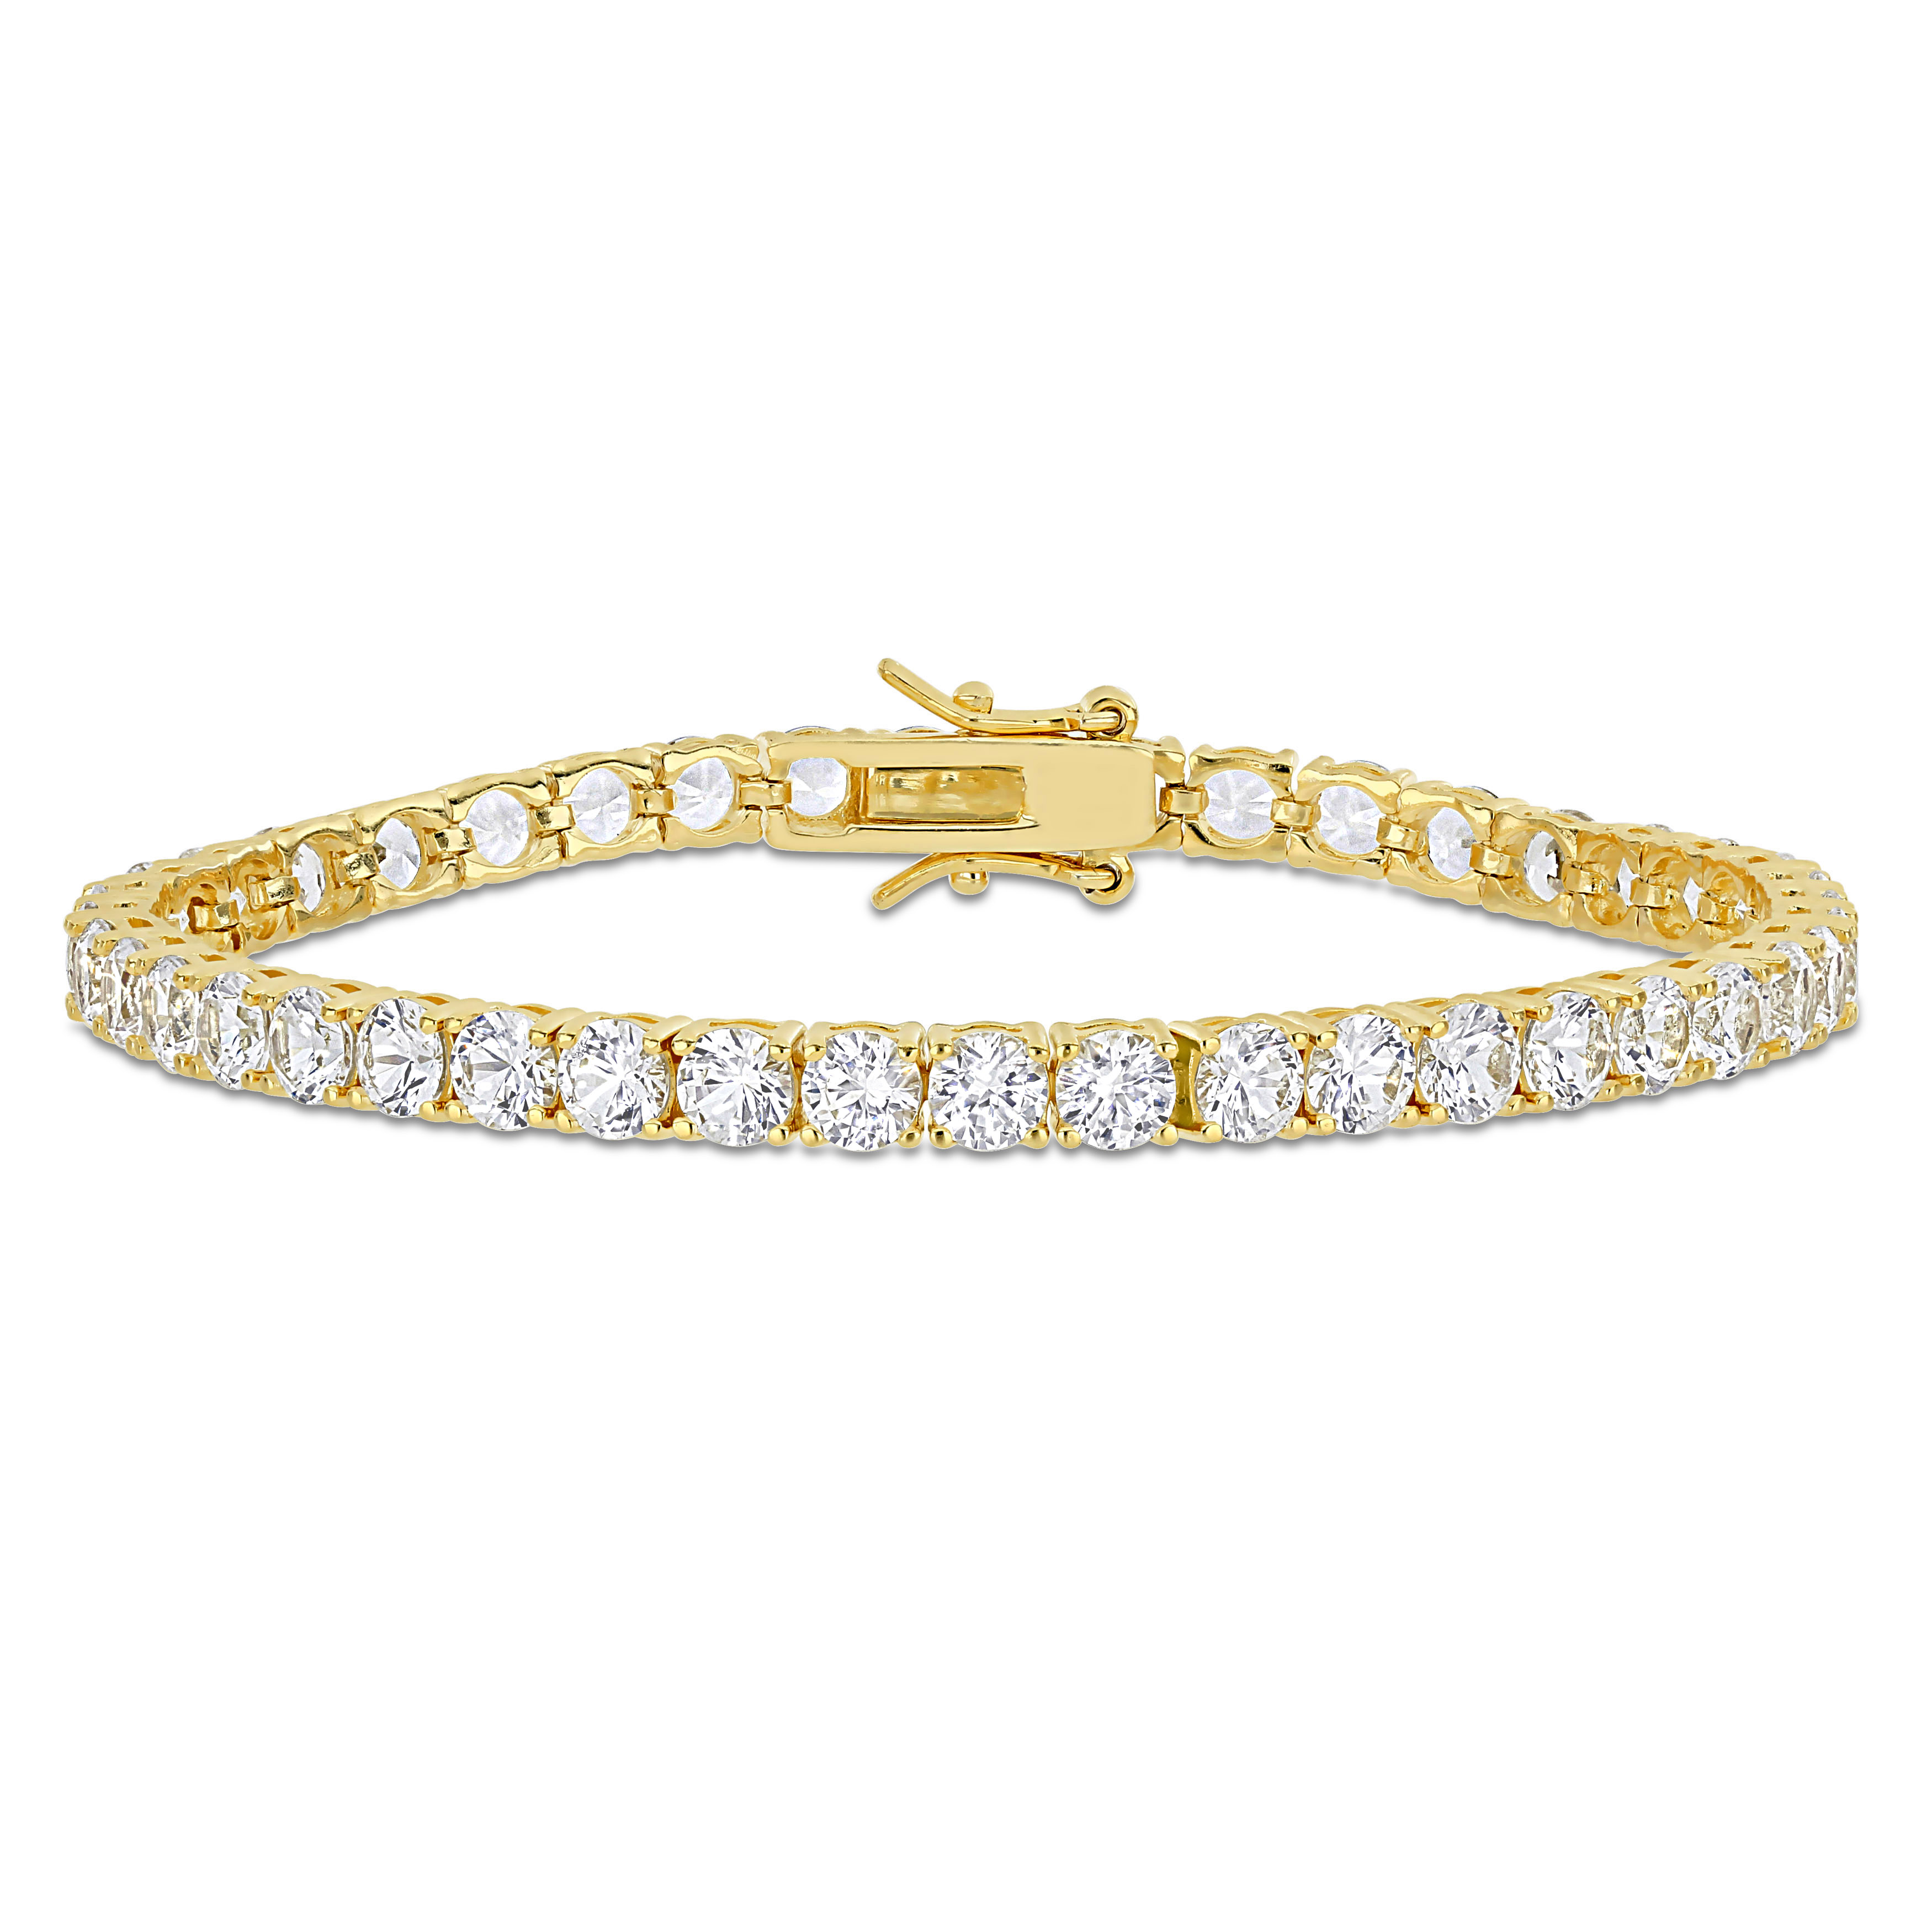 14 1/4 CT TGW Created White Sapphire Tennis Bracelet in Yellow Plated Sterling Silver